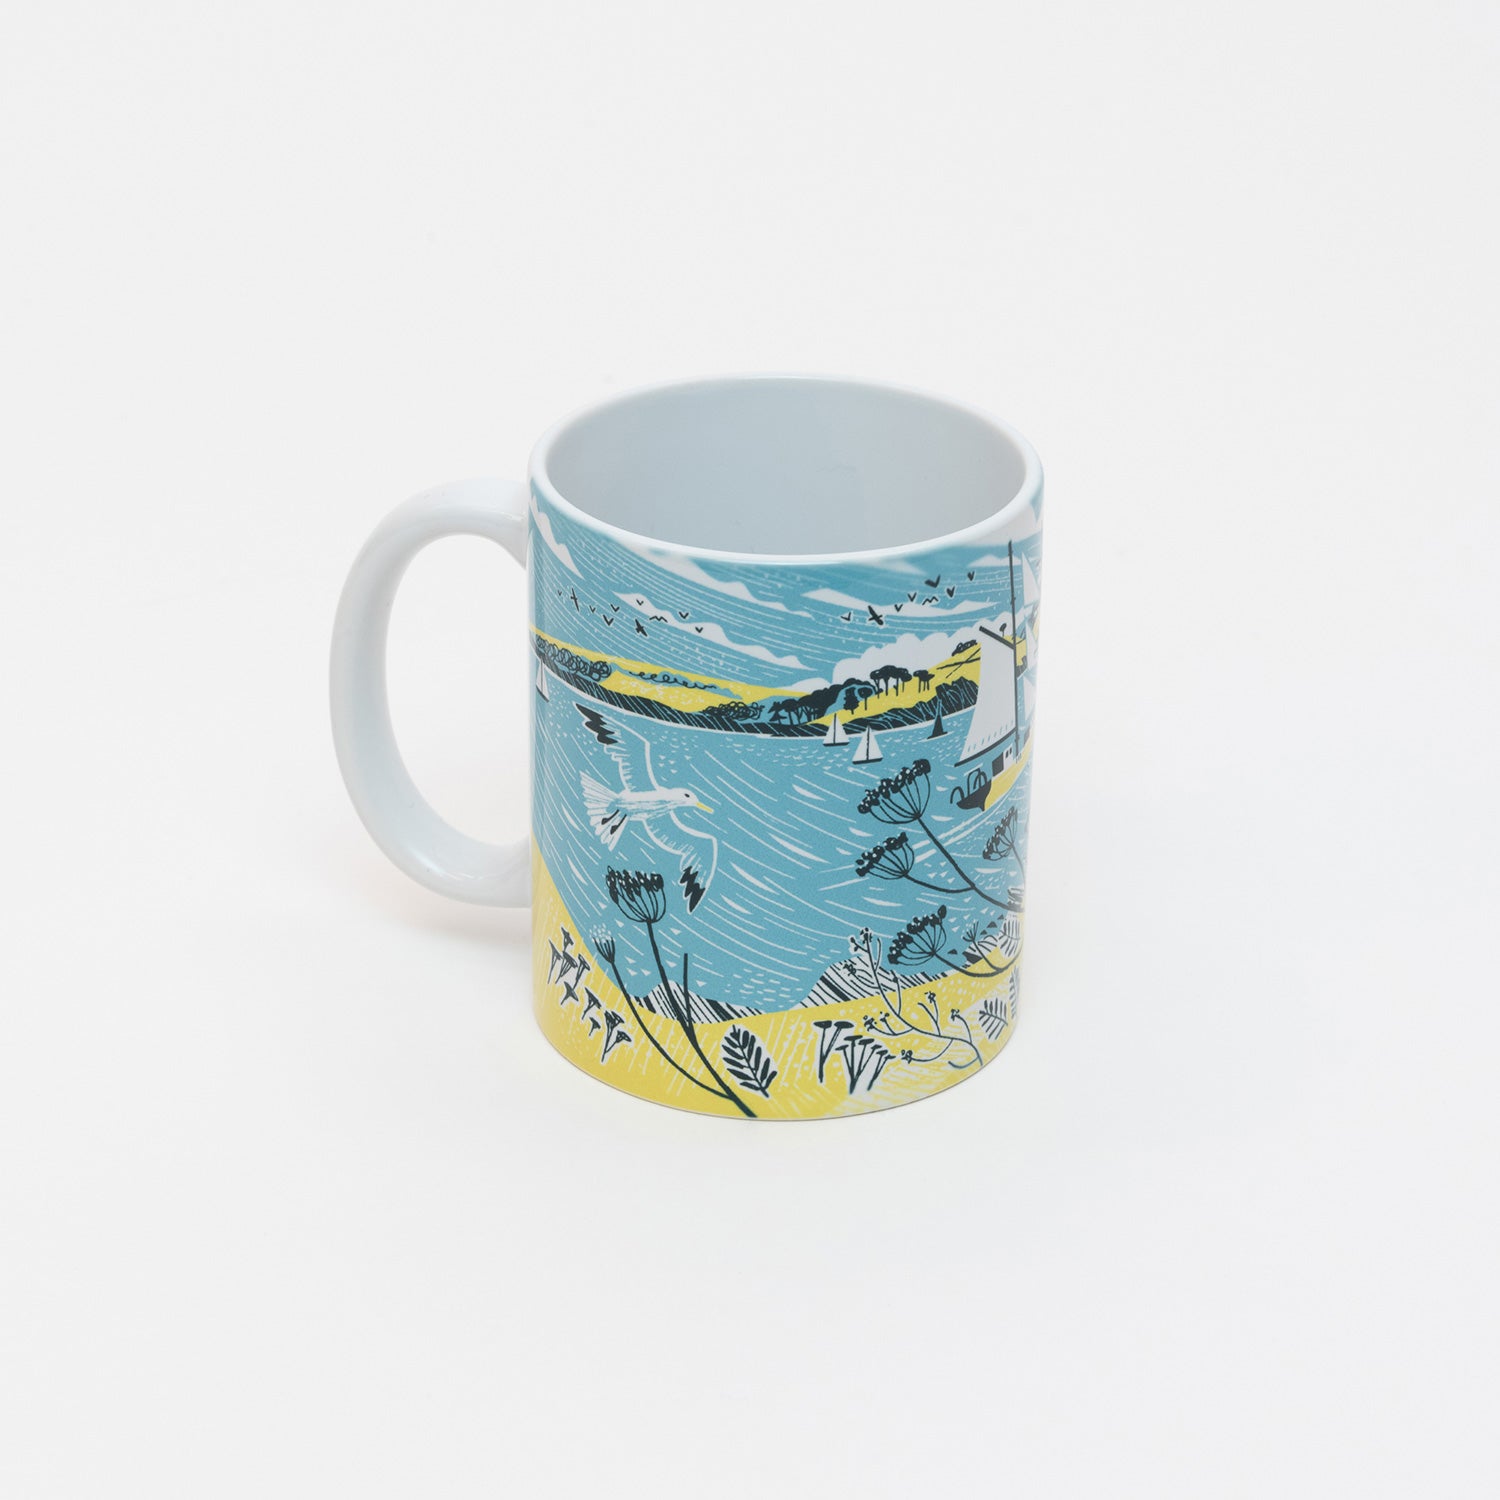 Front of the Falmouth Tall Ships Mug featuring an illustration of a tall ship in full sail in blue, yellow and white.